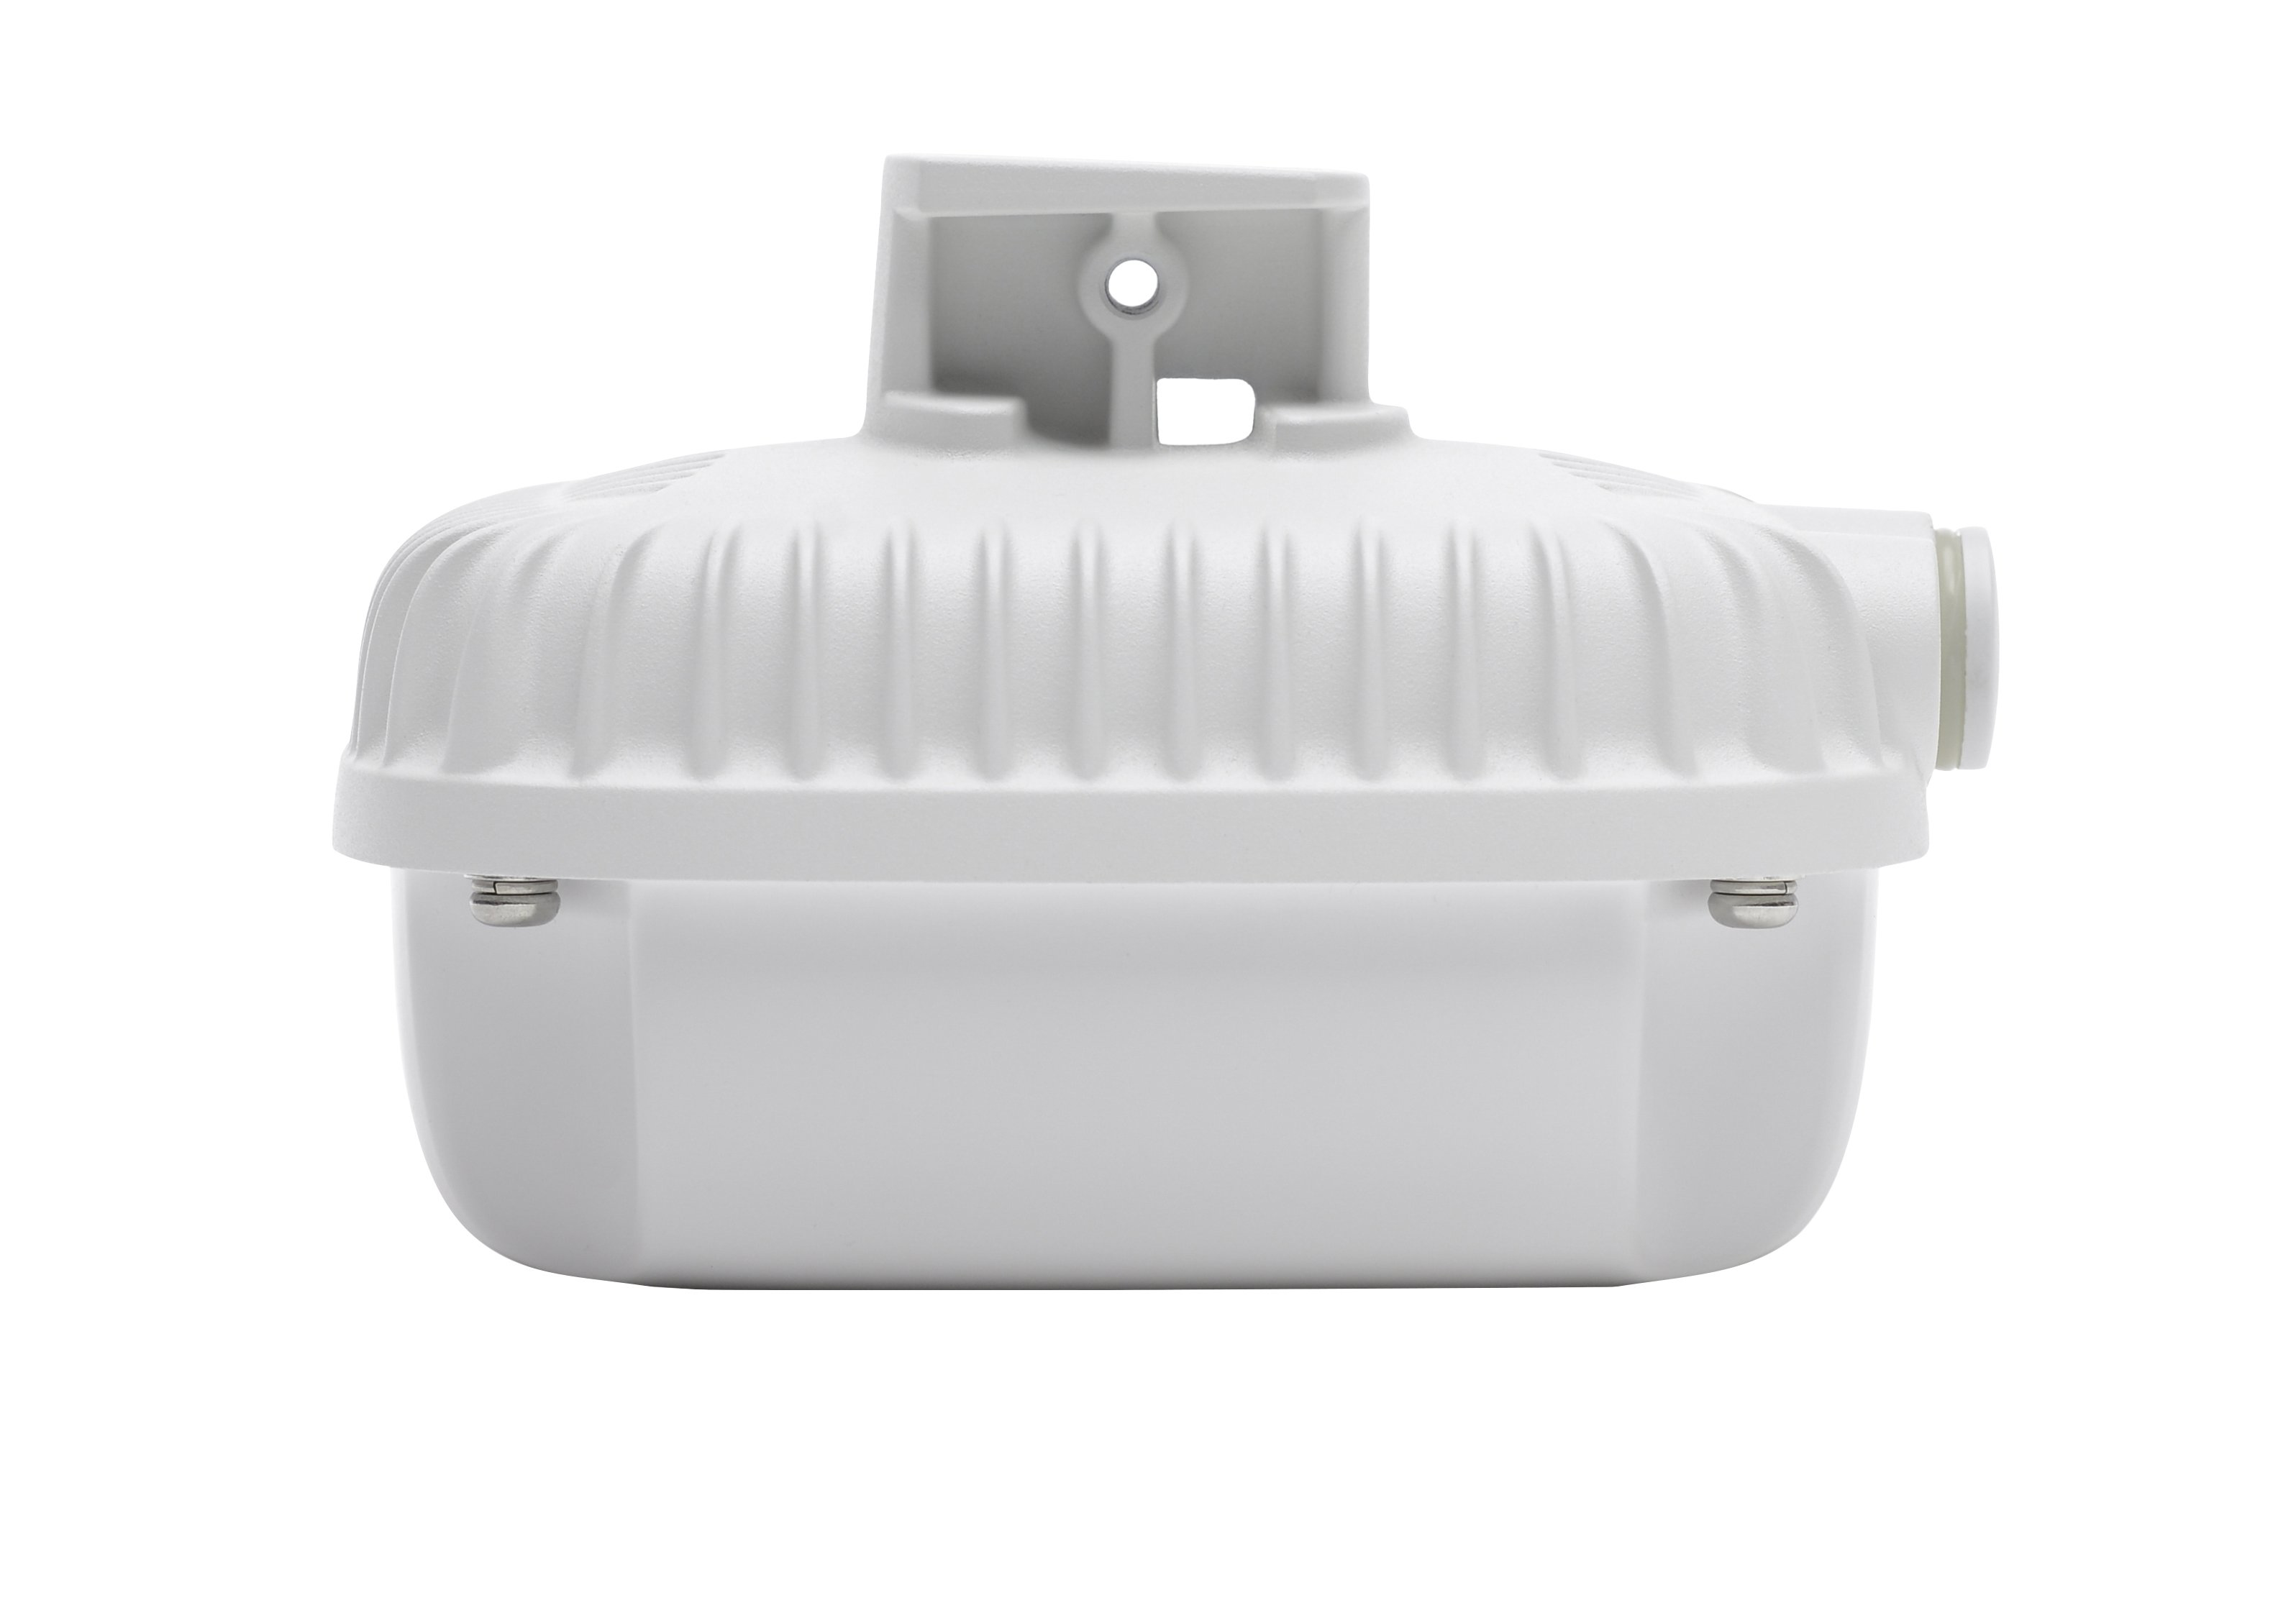 Access point Aruba AP-367 (RW) 1167 Mbit/s Bianco Supporto Power over Ethernet (PoE) [JX973A]